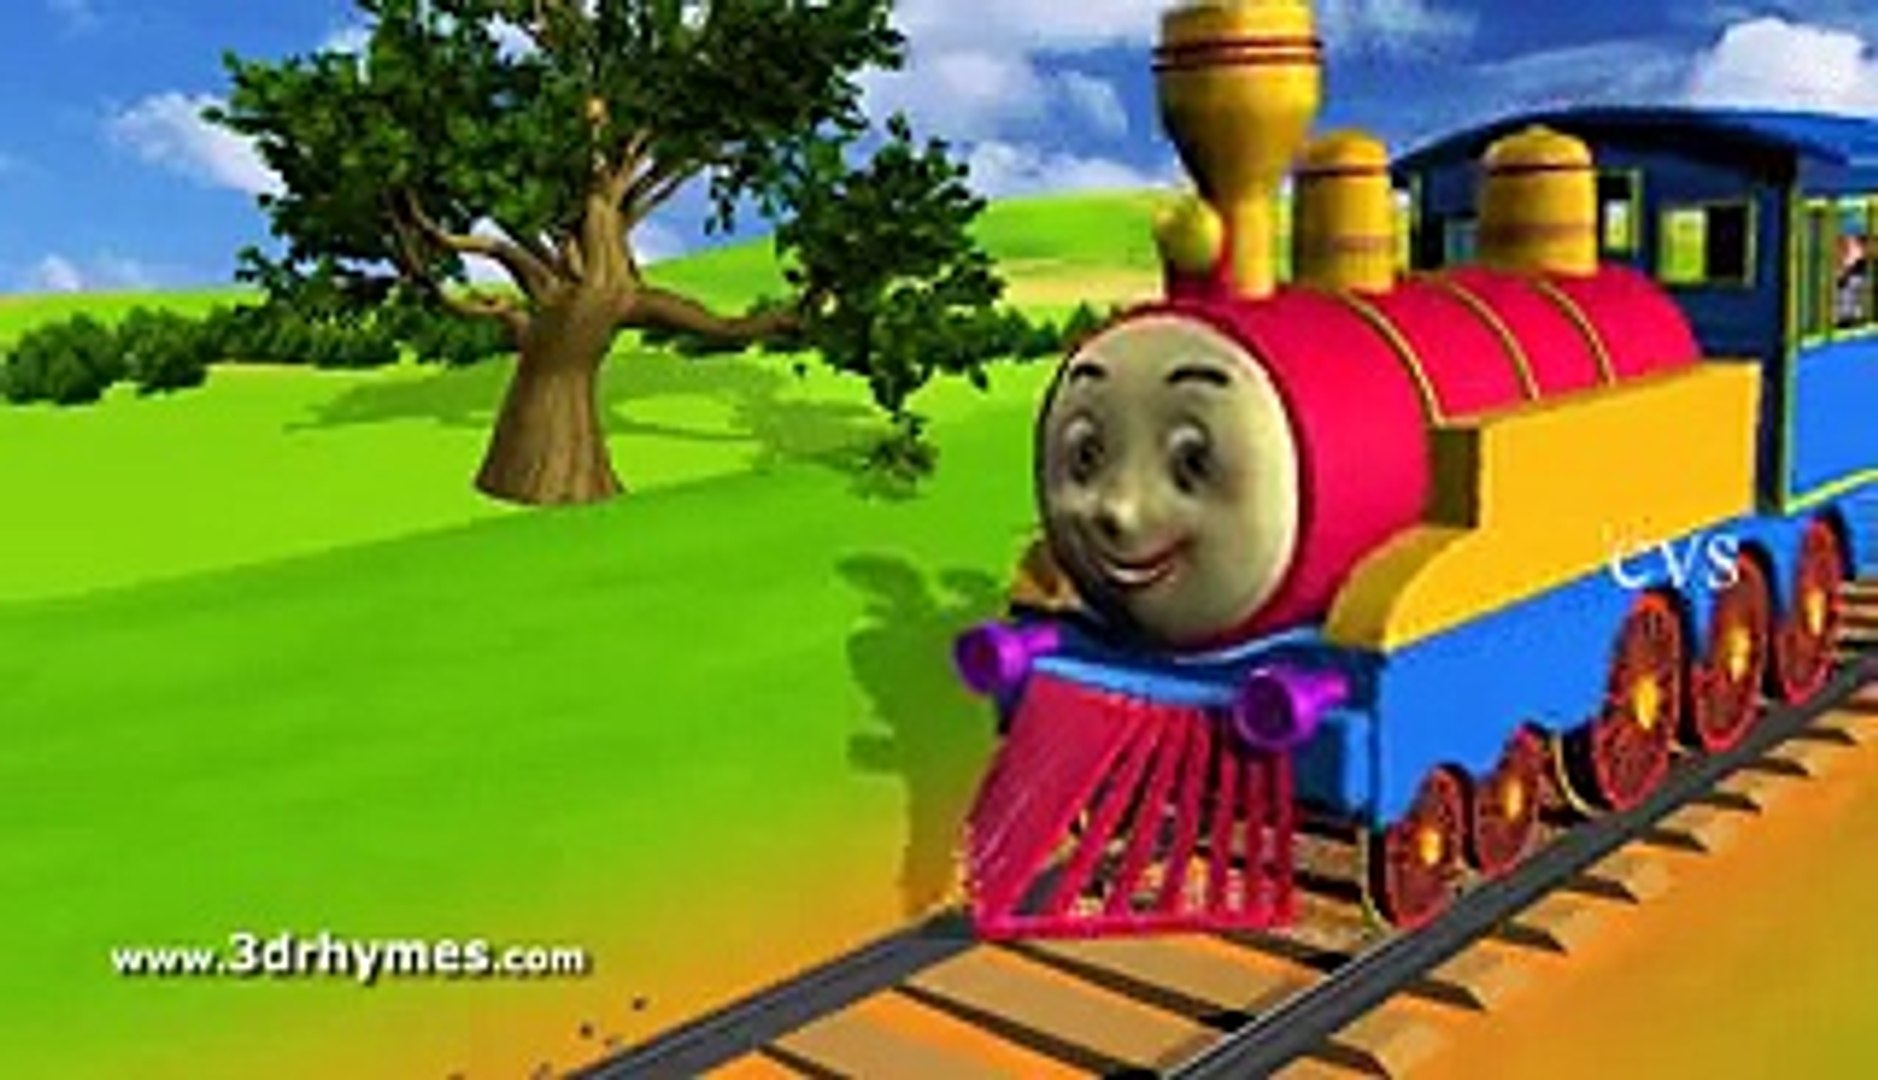 Piggy on the railway line 2015 | English Nursery rhymes - Watch all baby songs and kids music